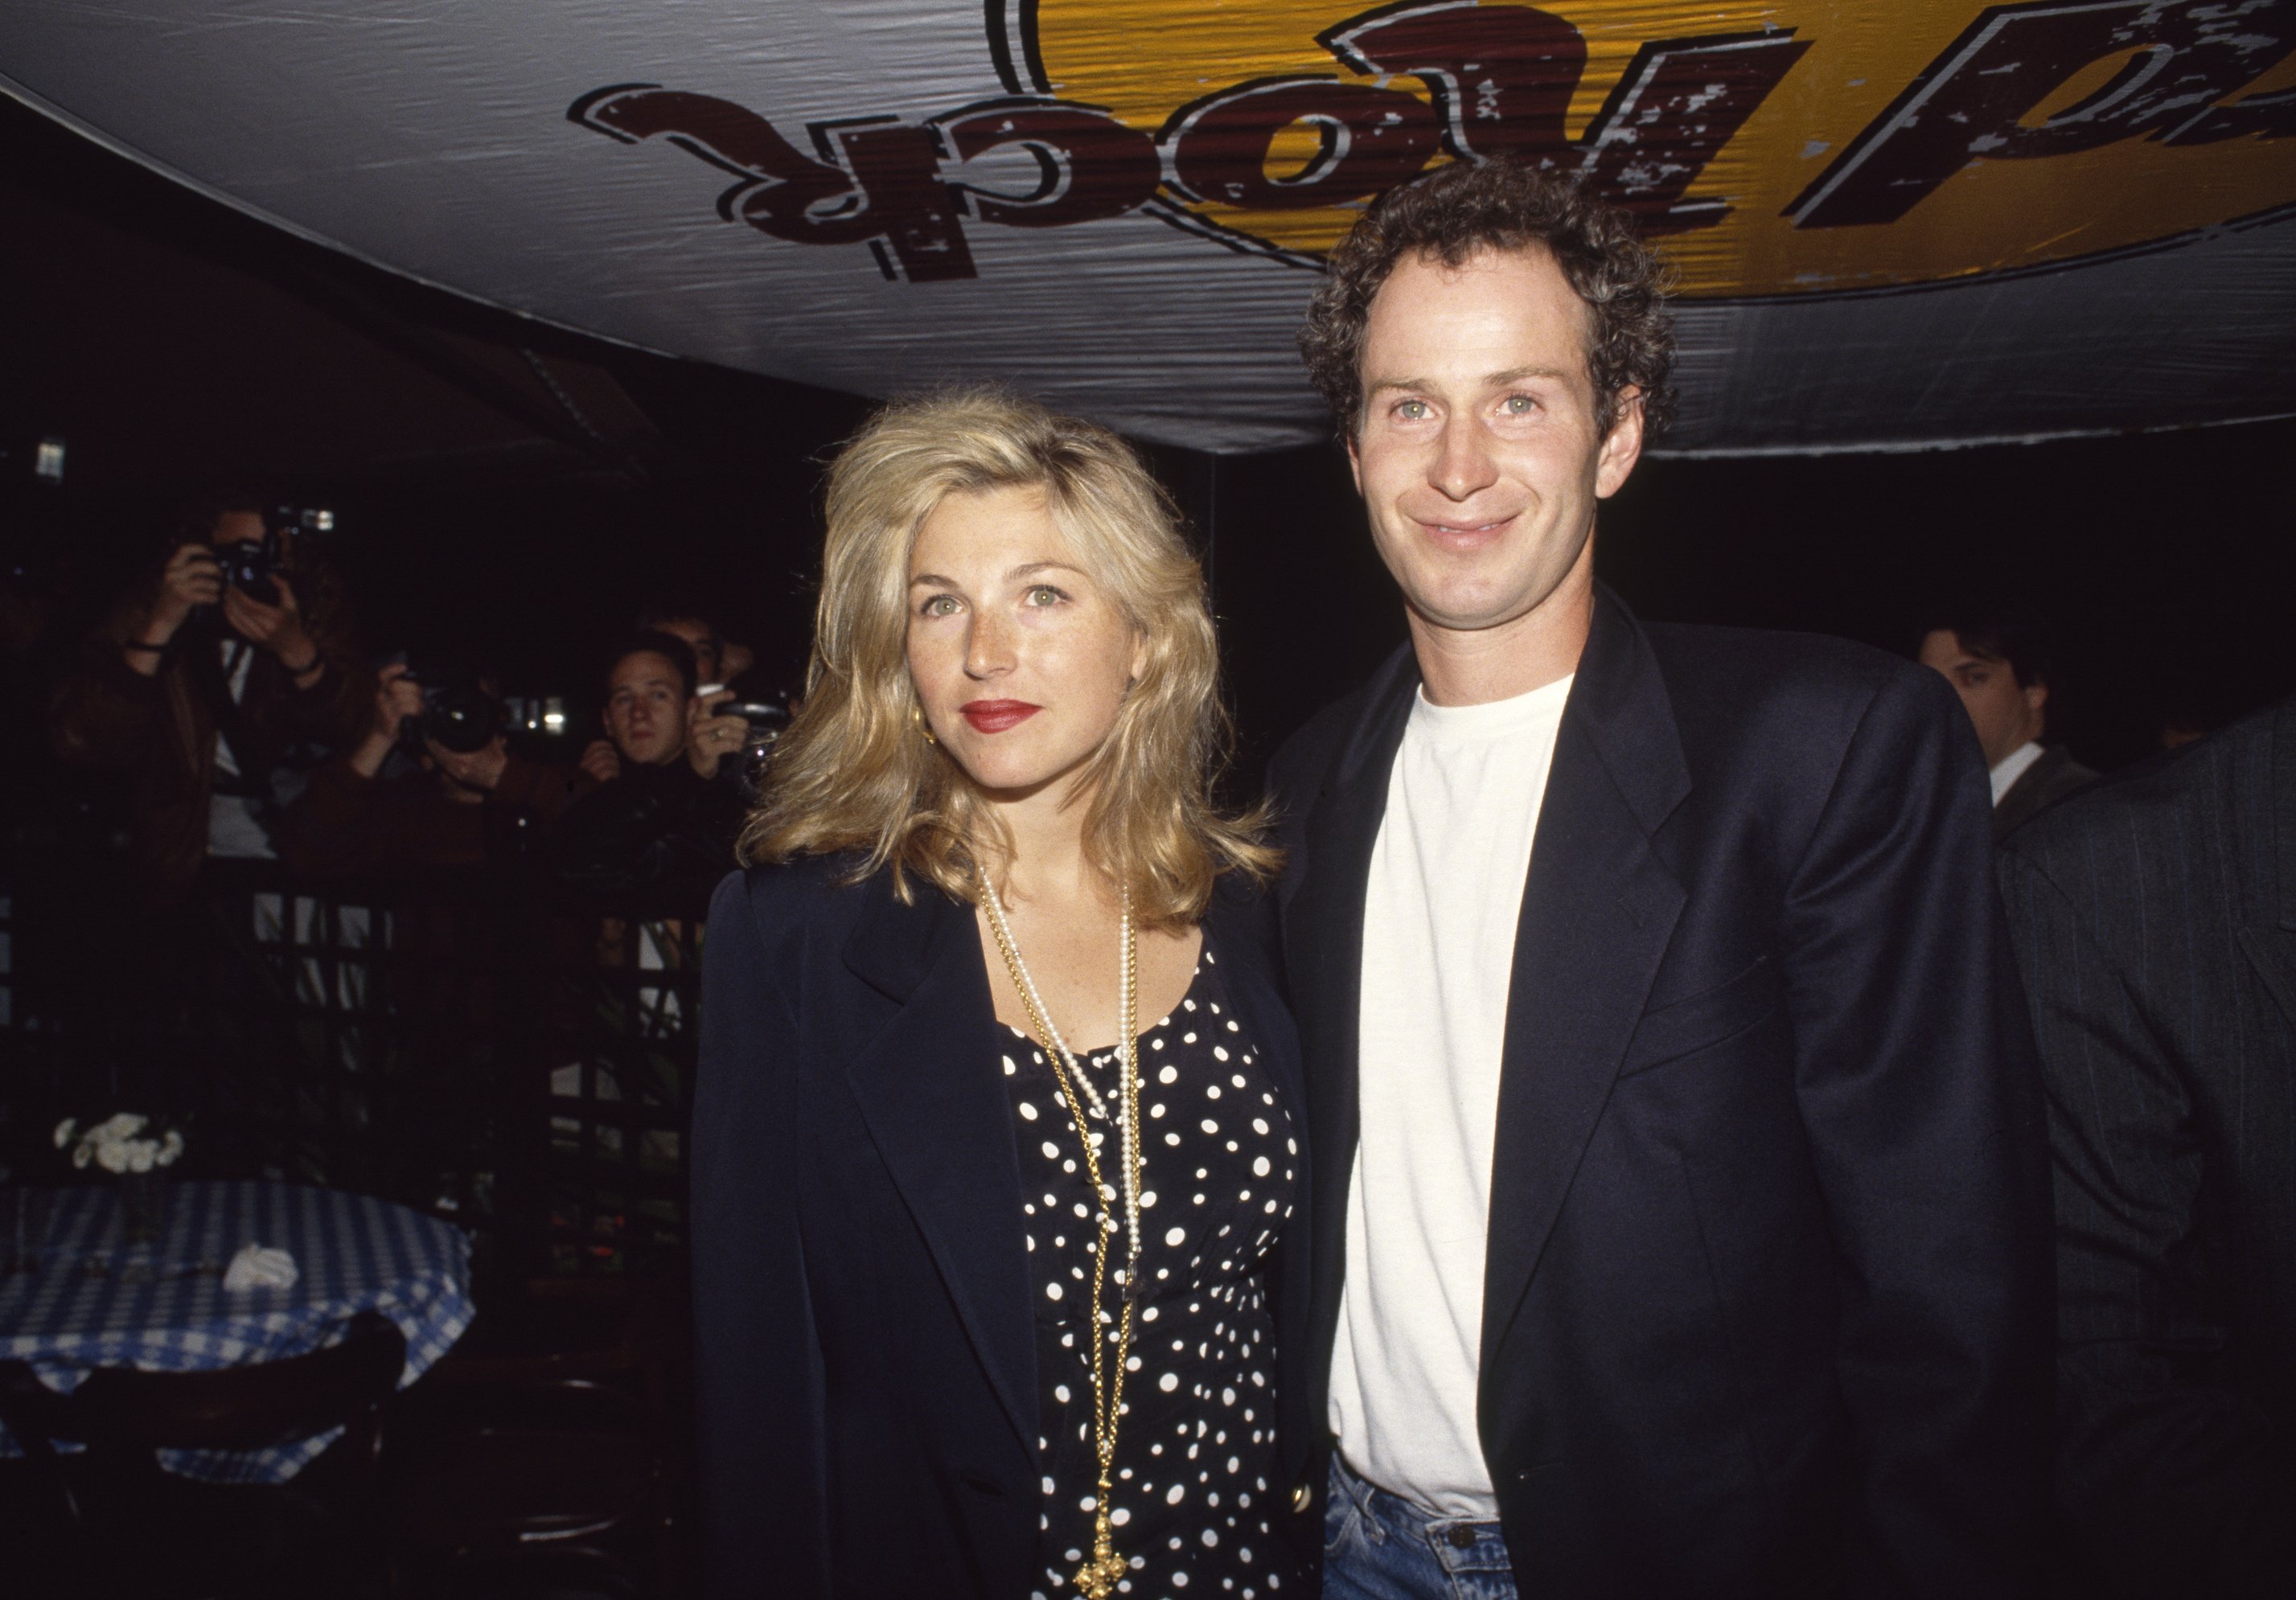 John McEnroe and Tatum O'Neal during the US Open Players' Party at the Hard Rock Cafe in New York, USA circa September 1990. | Photo : Getty Images